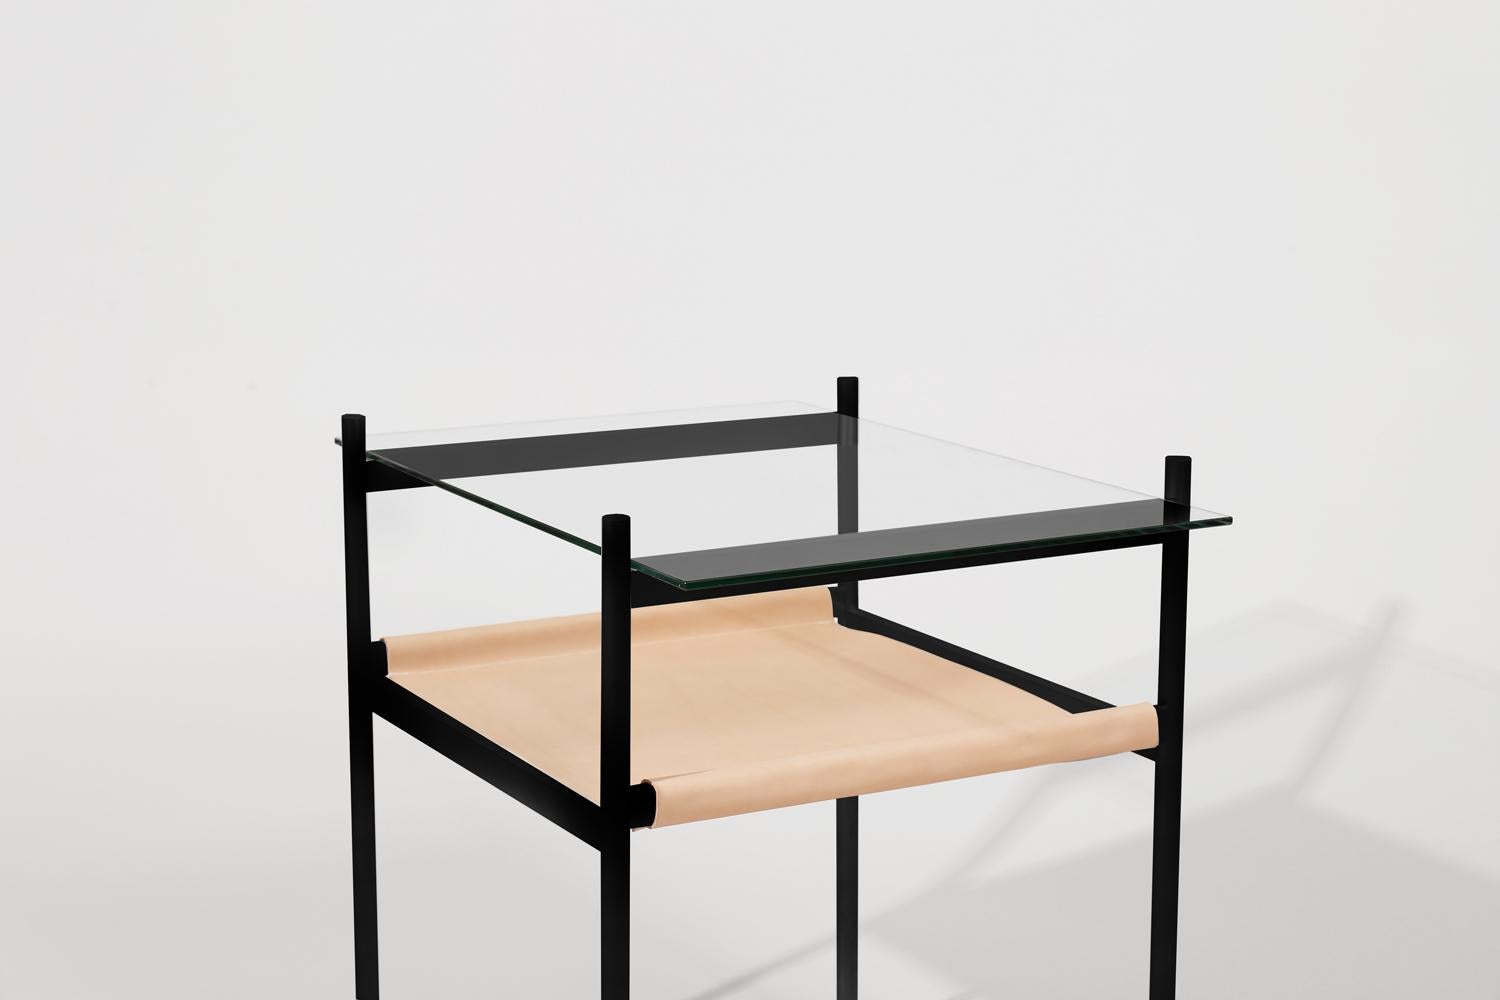 Made to order. Please allow six weeks for production.

Black frame / clear glass / natural leather sling

The Duotone Furniture series is based on a modular hardware system that pairs sturdy construction with visual lightness and a range of